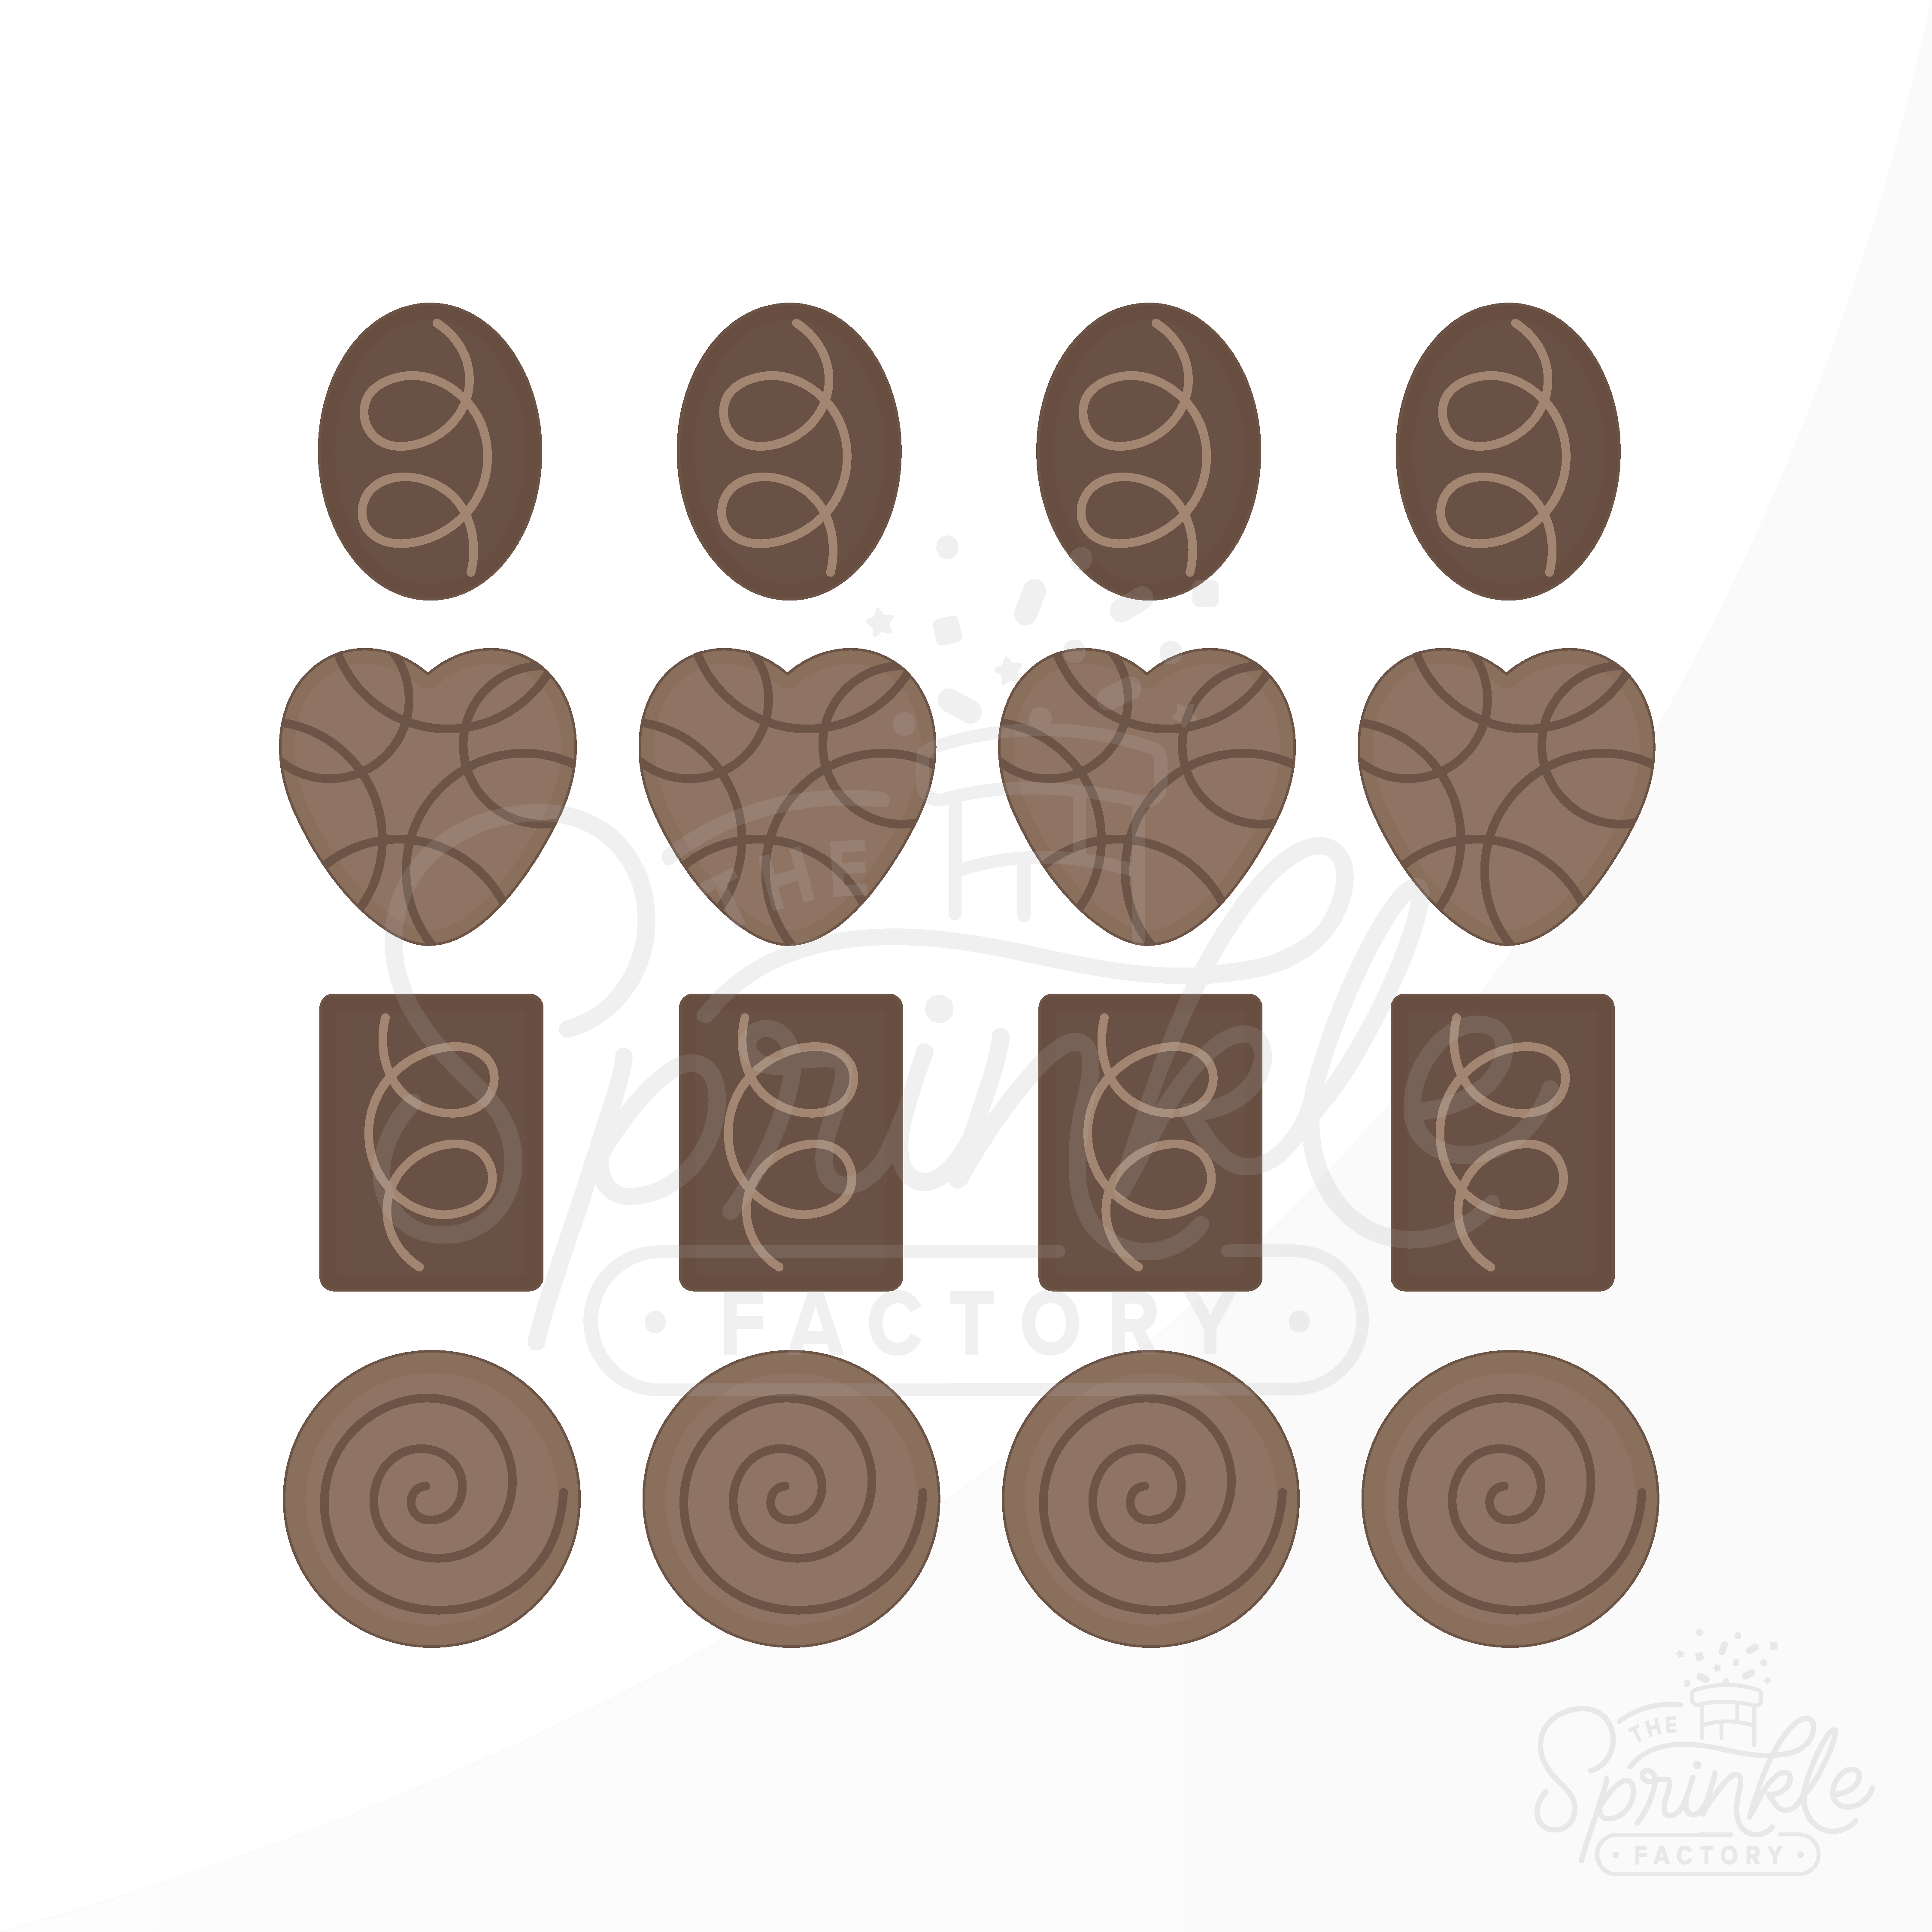 Graphic image of chocolates. 4 rows or 4.